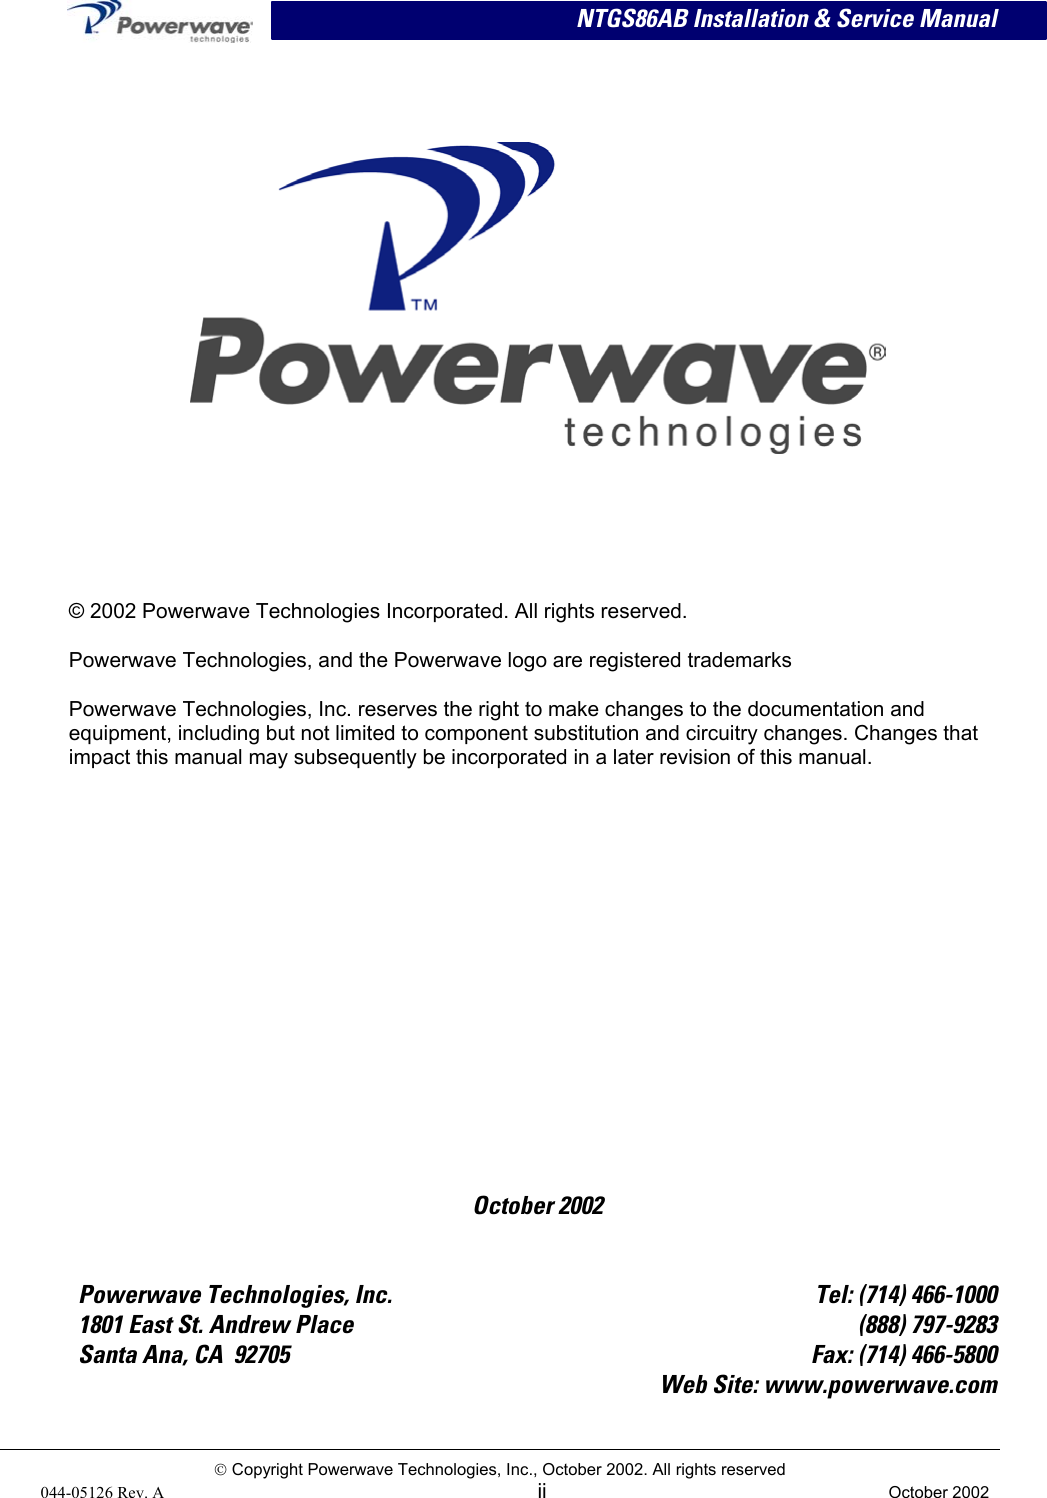  NTGS86AB Installation &amp; Service Manual      October 2002 © 2002 Powerwave Technologies Incorporated. All rights reserved. Powerwave Technologies, and the Powerwave logo are registered trademarks Powerwave Technologies, Inc. reserves the right to make changes to the documentation and equipment, including but not limited to component substitution and circuitry changes. Changes that impact this manual may subsequently be incorporated in a later revision of this manual.   Powerwave Technologies, Inc.  Tel: (714) 466-1000 1801 East St. Andrew Place  (888) 797-9283 Santa Ana, CA  92705  Fax: (714) 466-5800   Web Site: www.powerwave.com  Copyright Powerwave Technologies, Inc., October 2002. All rights reserved 044-05126 Rev. A  ii  October 2002  